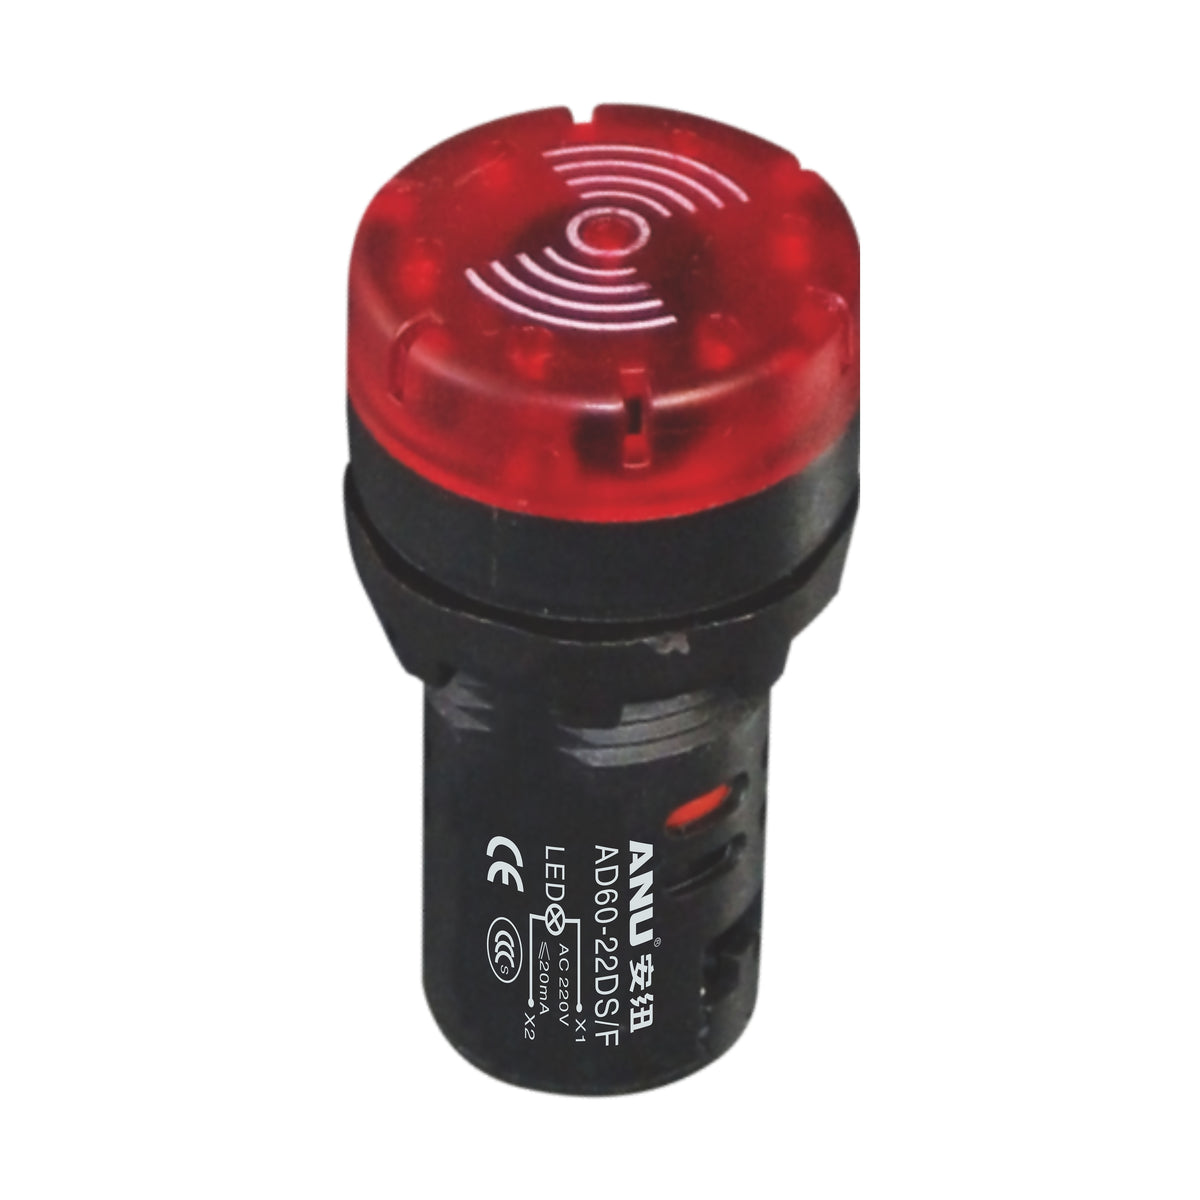 22mm Buzzer with Flashing Black Shell Short Version Red